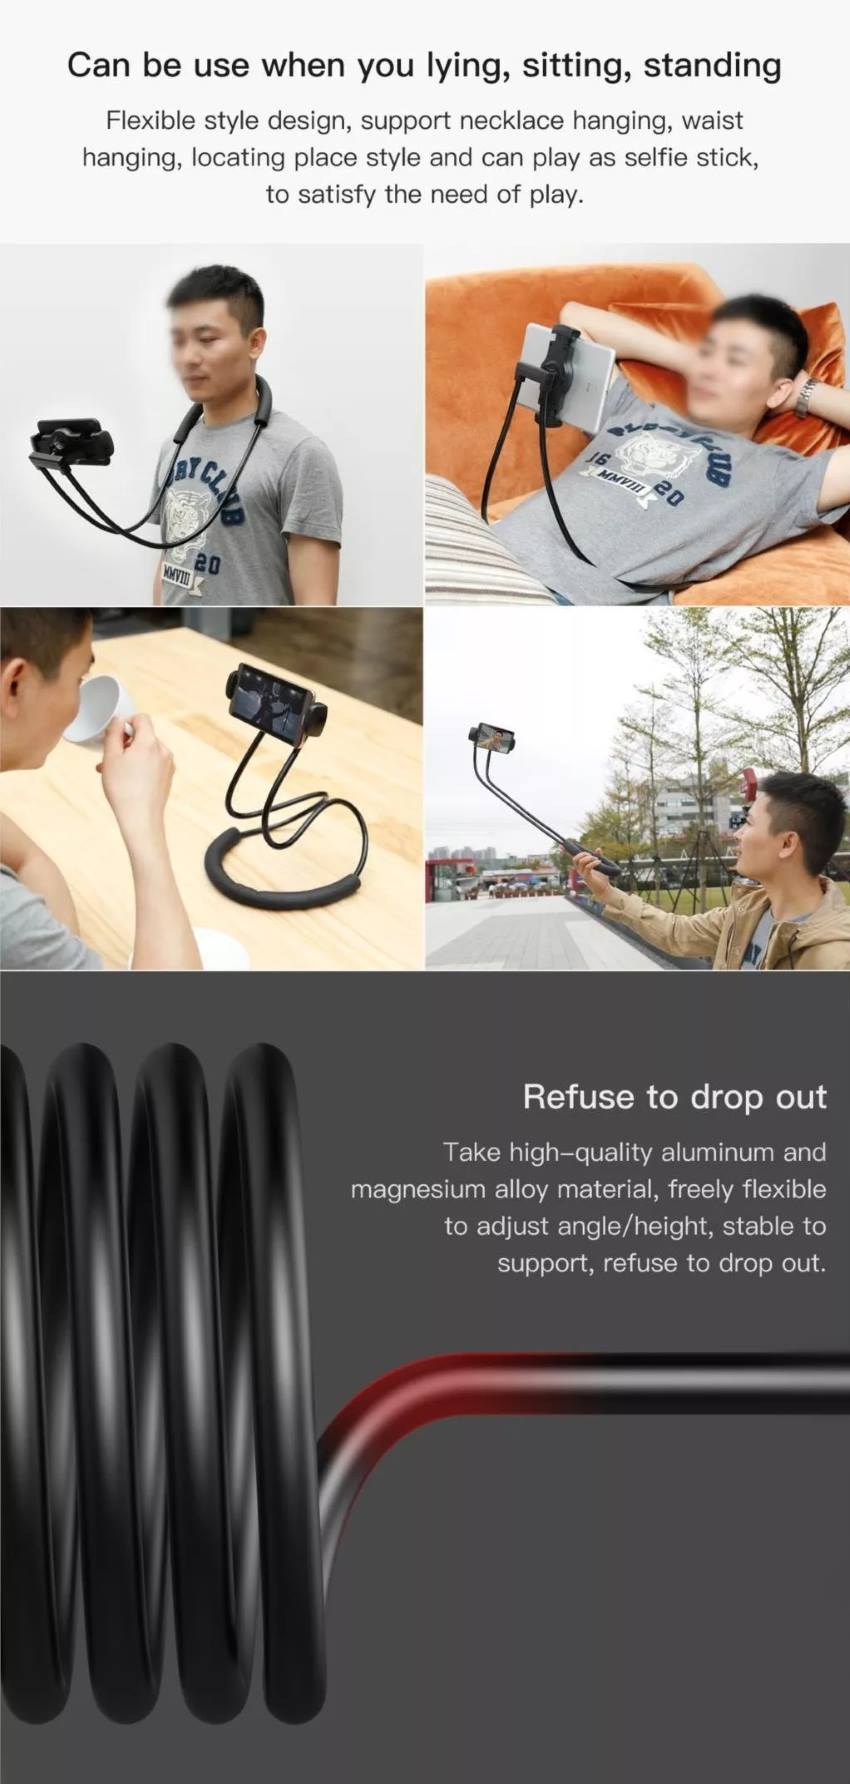 baseus 360 degree long arm flexible necklace holder lazy bracket for mobile phones and tablets